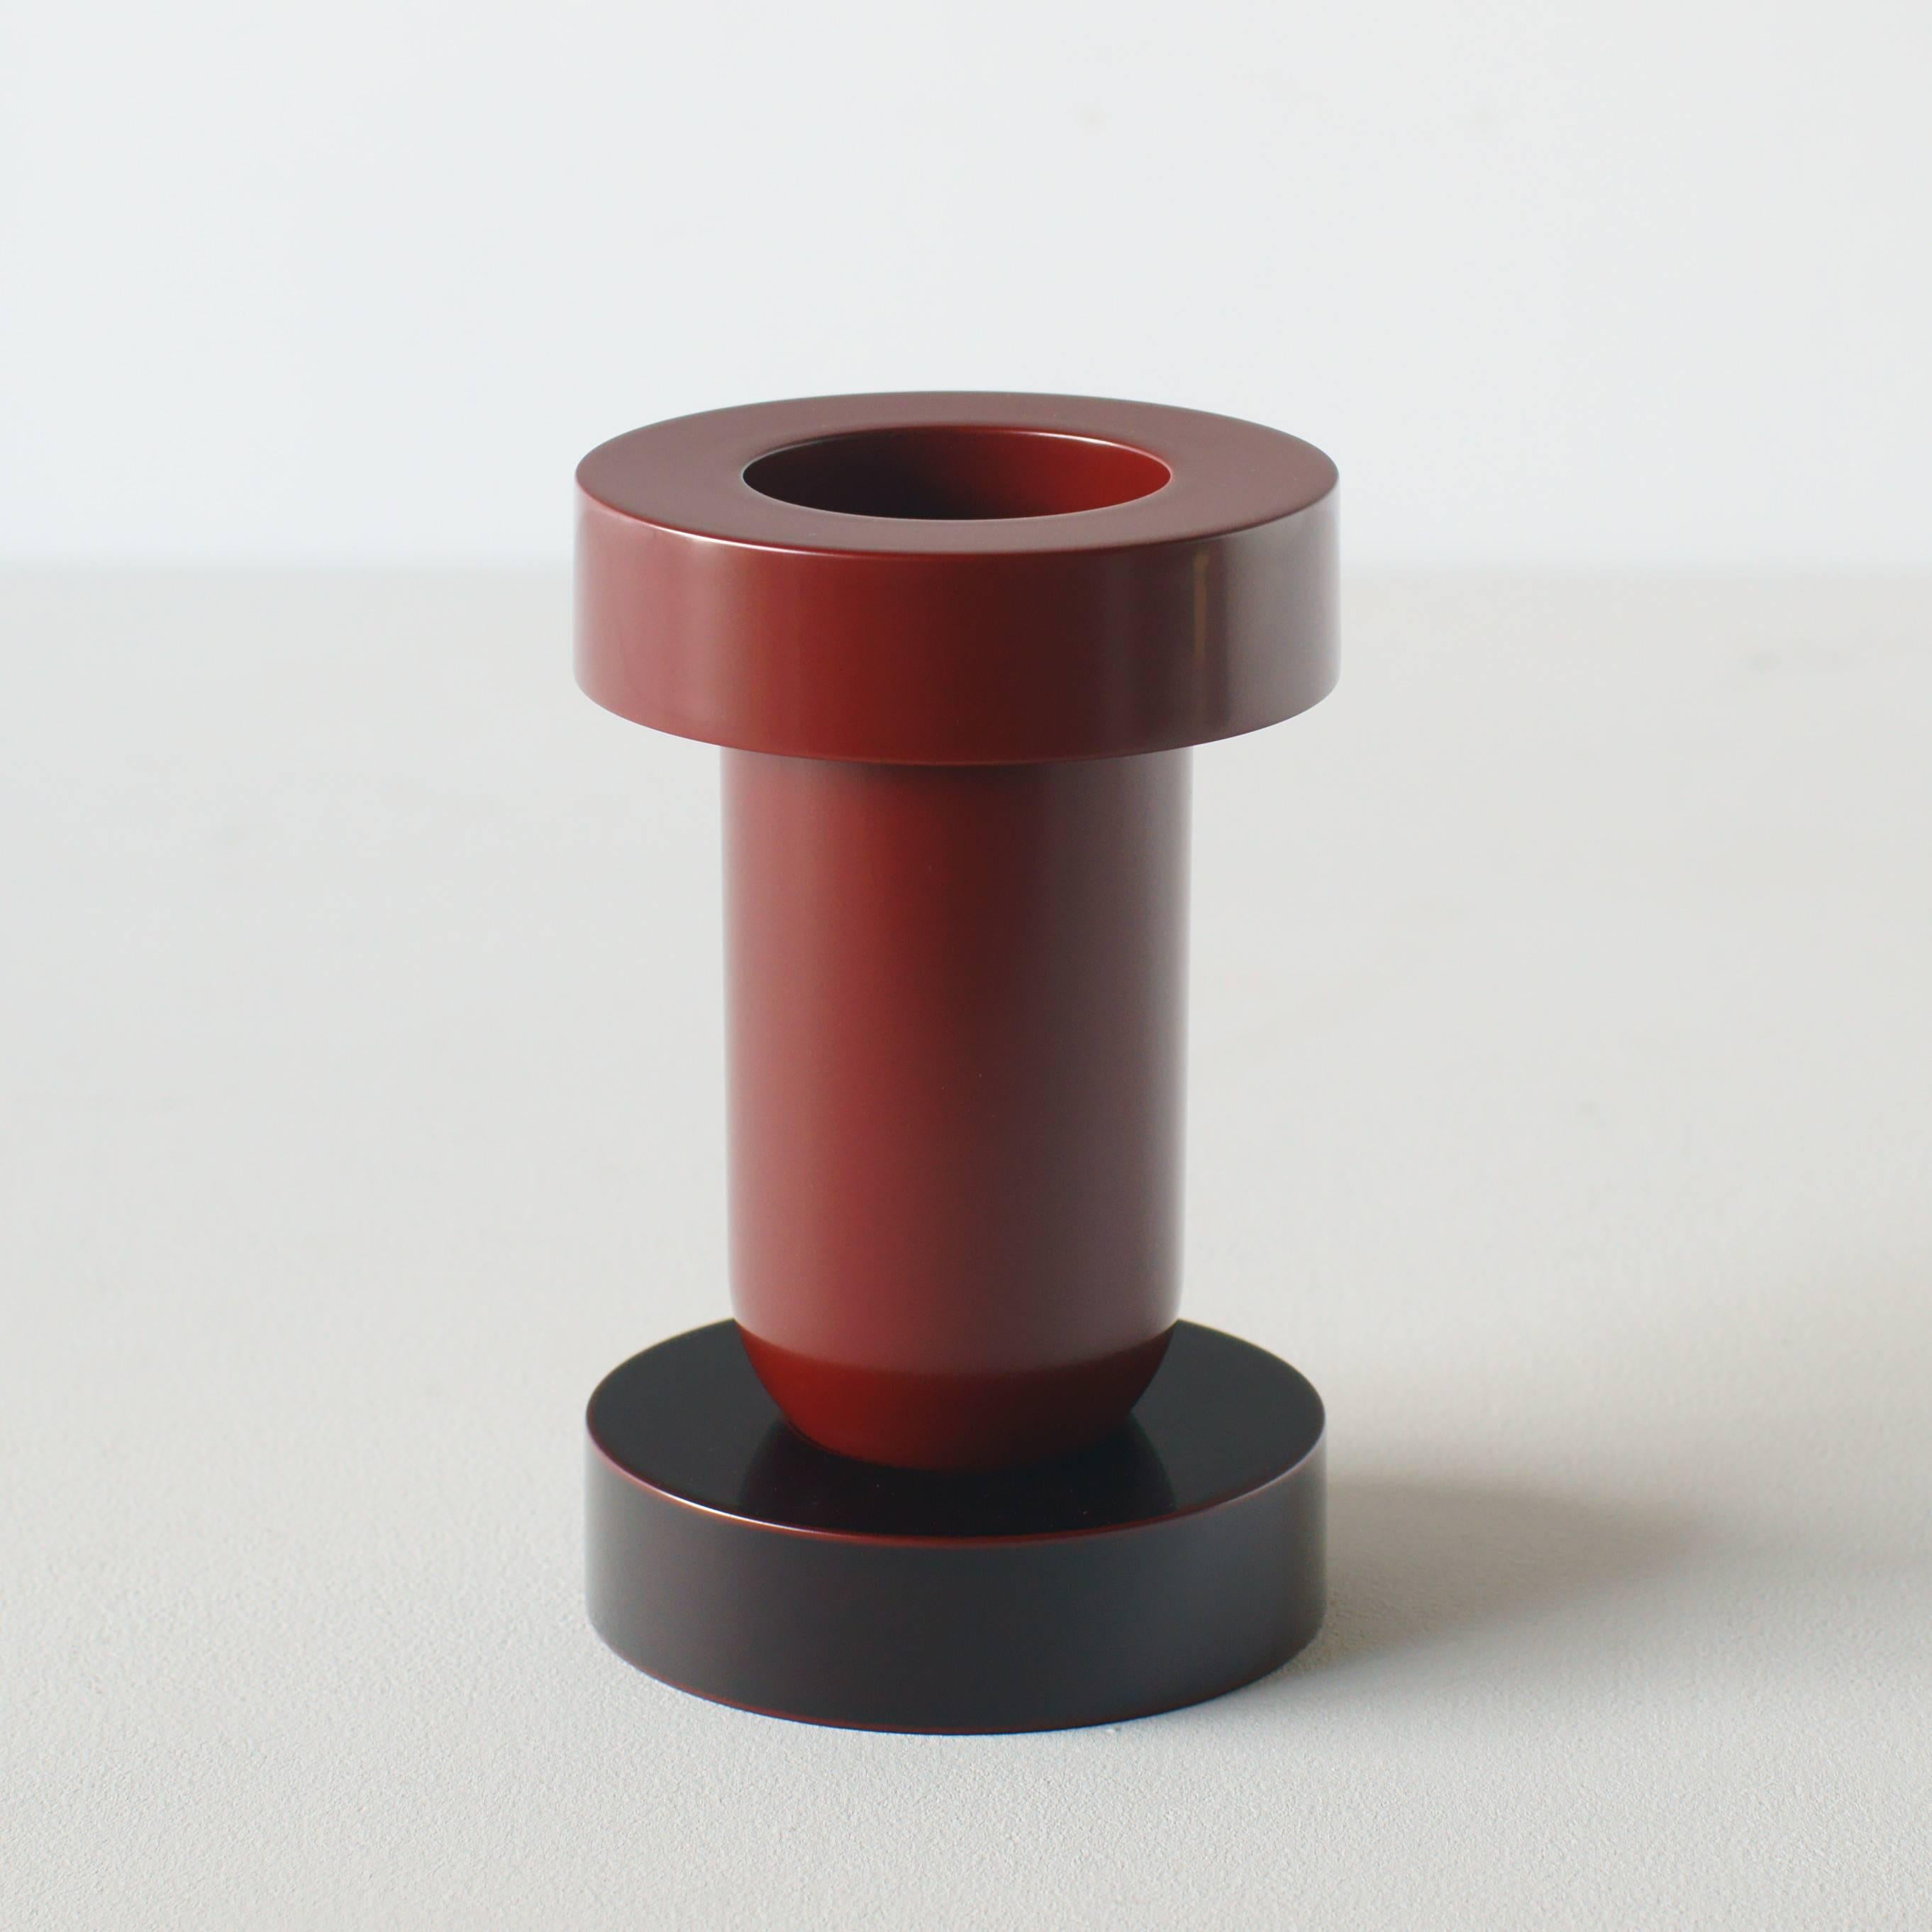 Mirto flower vase designed by Ettore Sottsass for Marutomi. This model is limited Japanese urushi laquer model. 
Japanese traditional urushi pigment is made from natural urushi tree, which has about 9,000 year’s history.
These two colors of dark